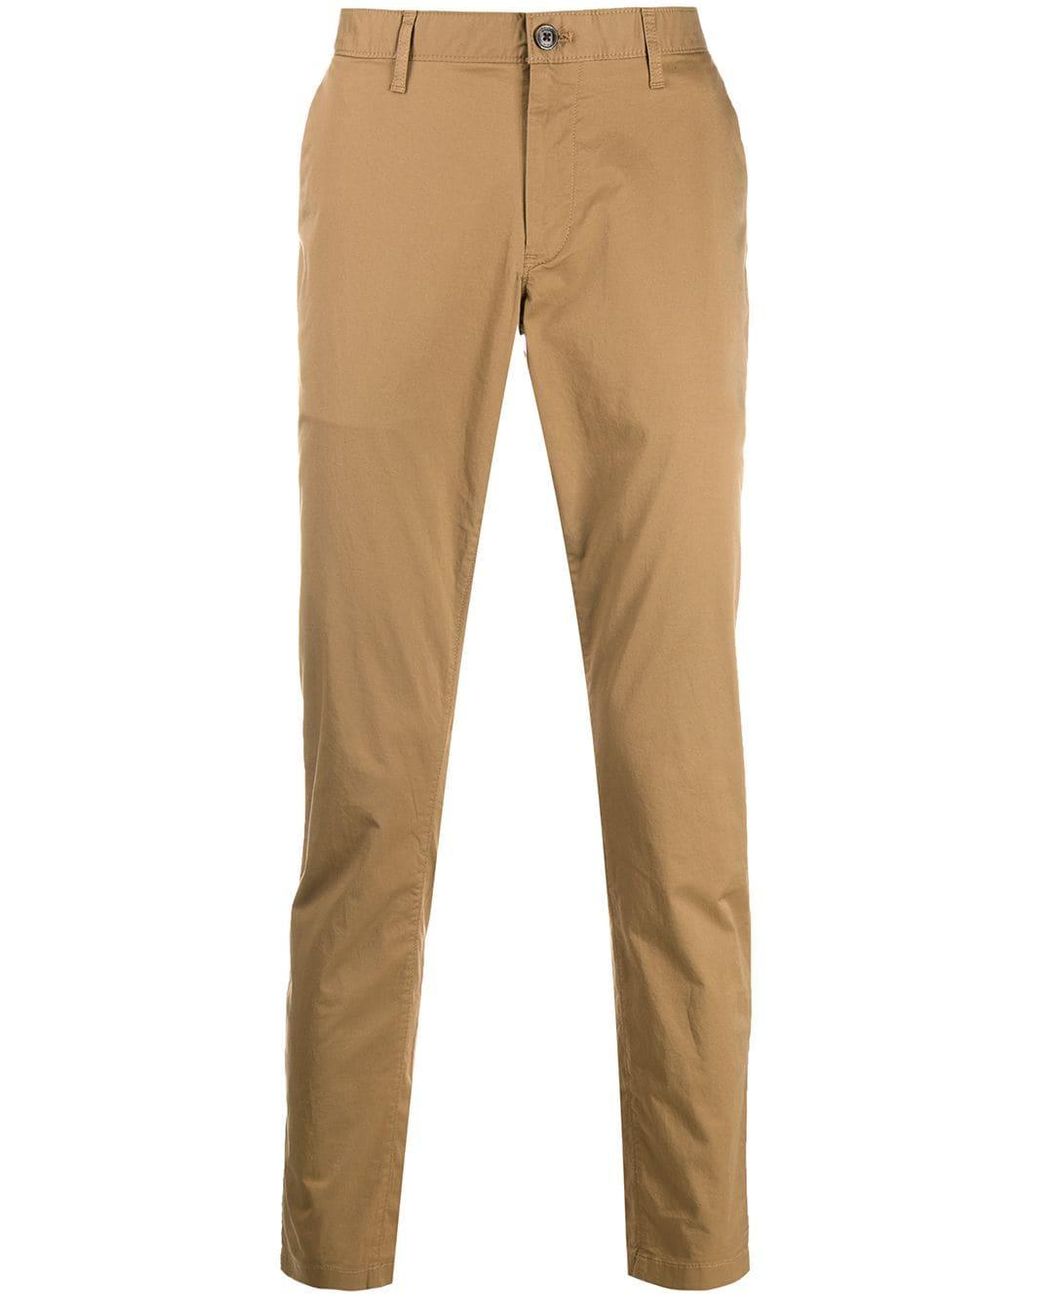 Michael Kors Synthetic Straight-leg Trousers in Brown for Men - Lyst